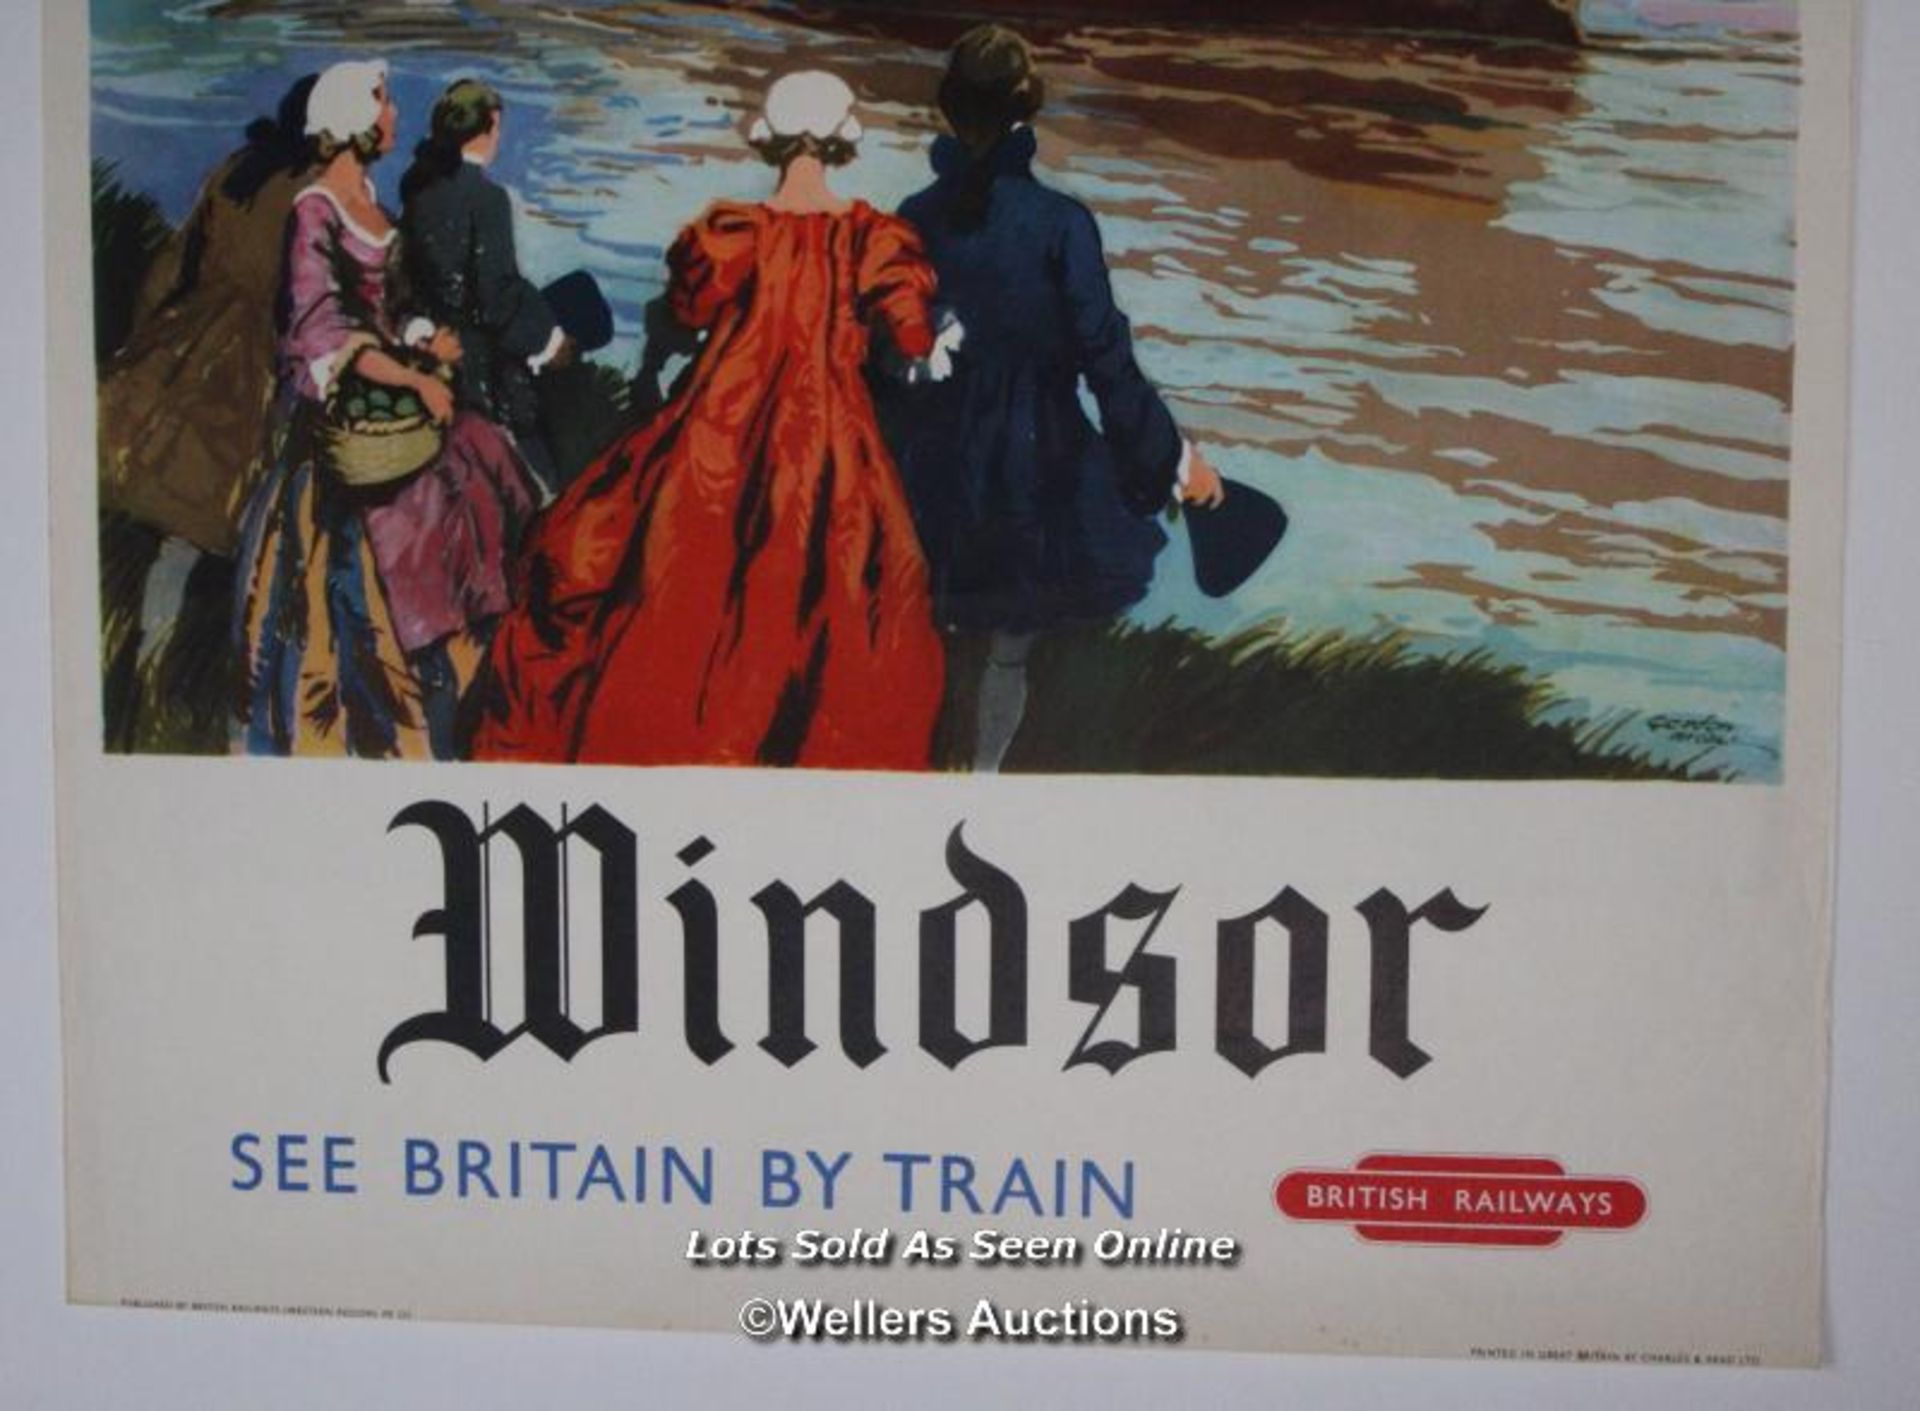 Vintage British Railways poster 'Windsor - See Britain By Train' by Gordon Nicoll double royal,25 - Image 2 of 6